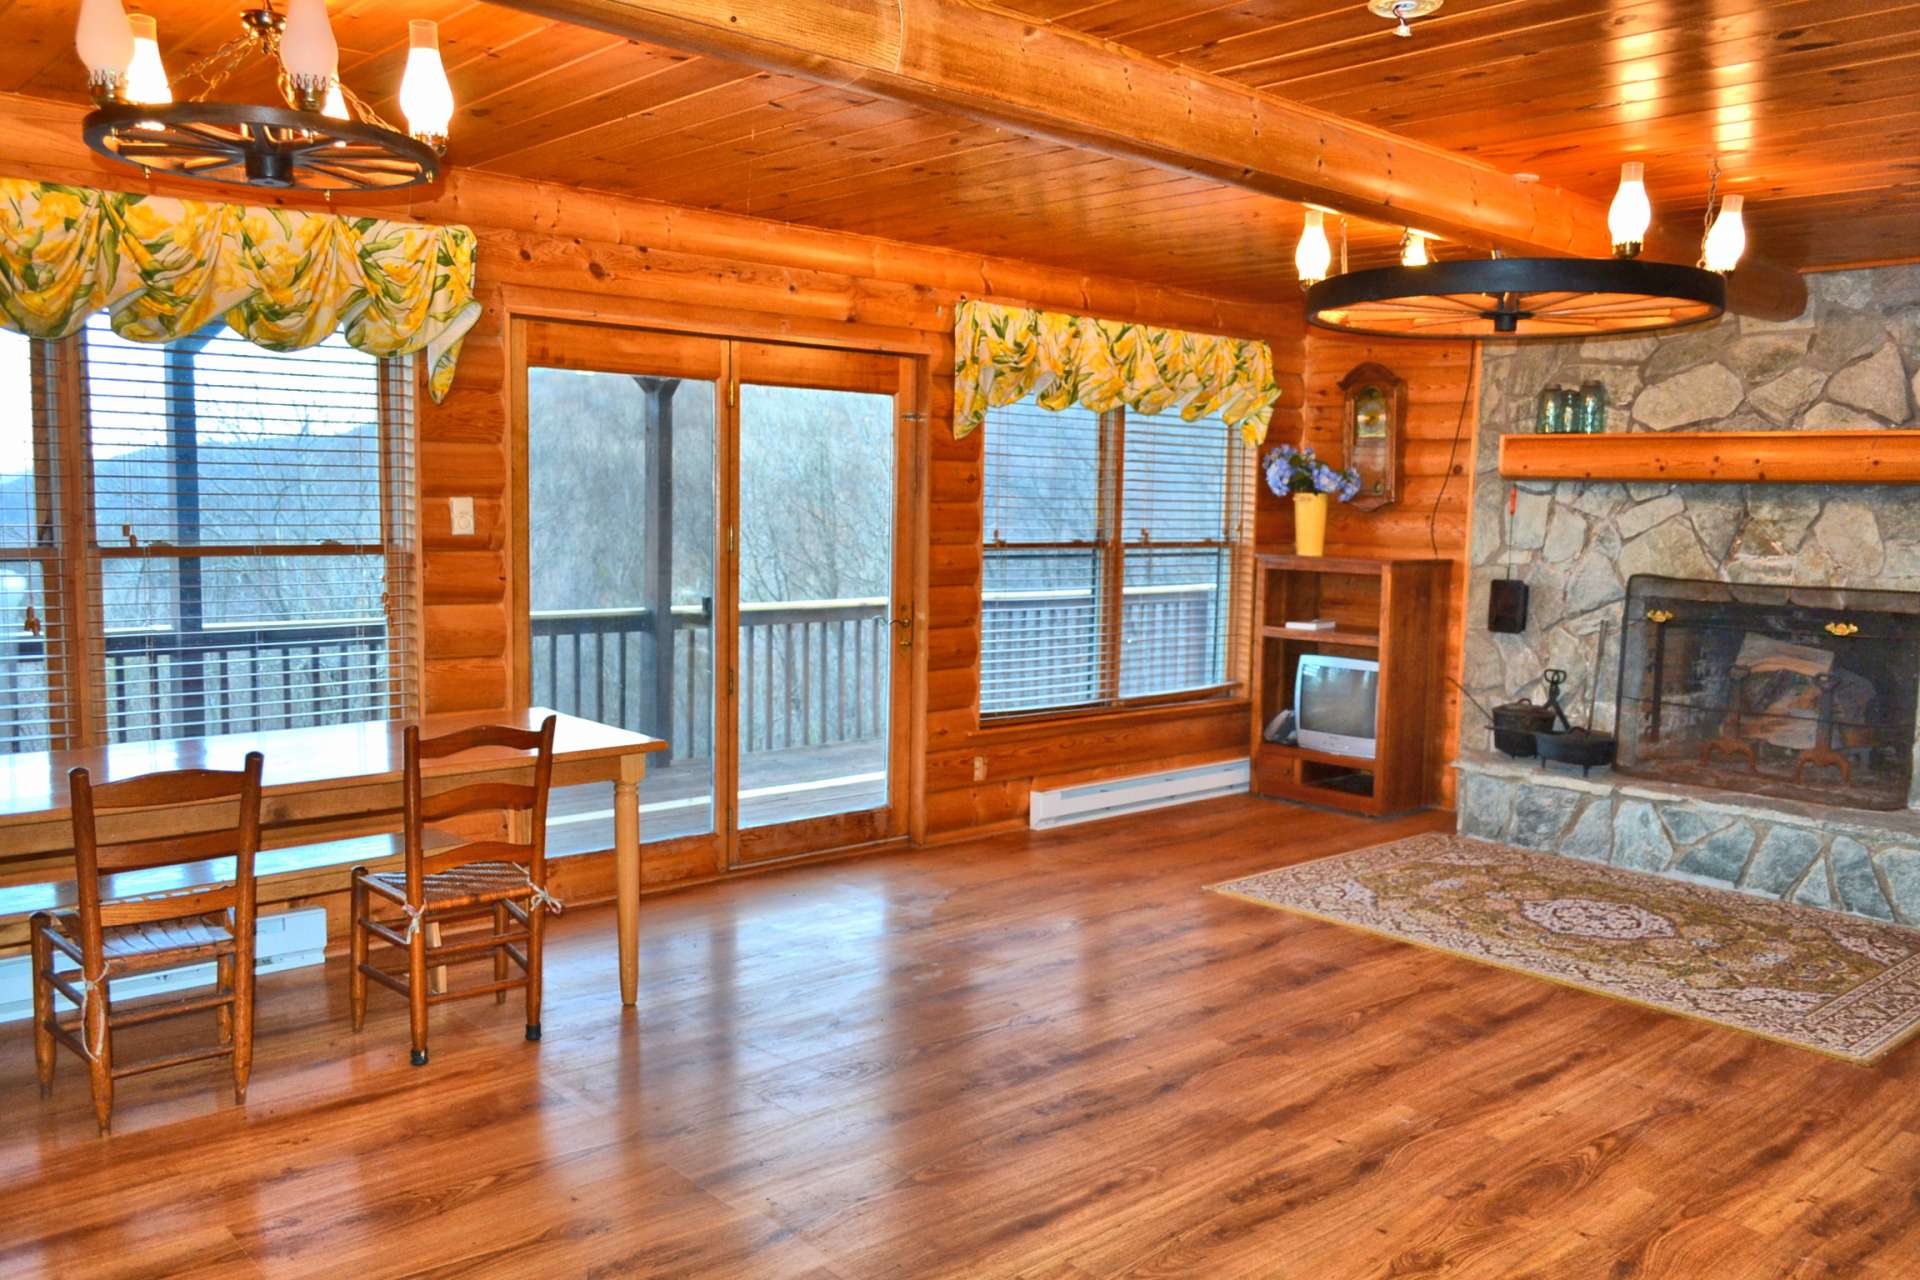 The main level offers an open great room with lots of glass allowing natural light to fill the cabin.